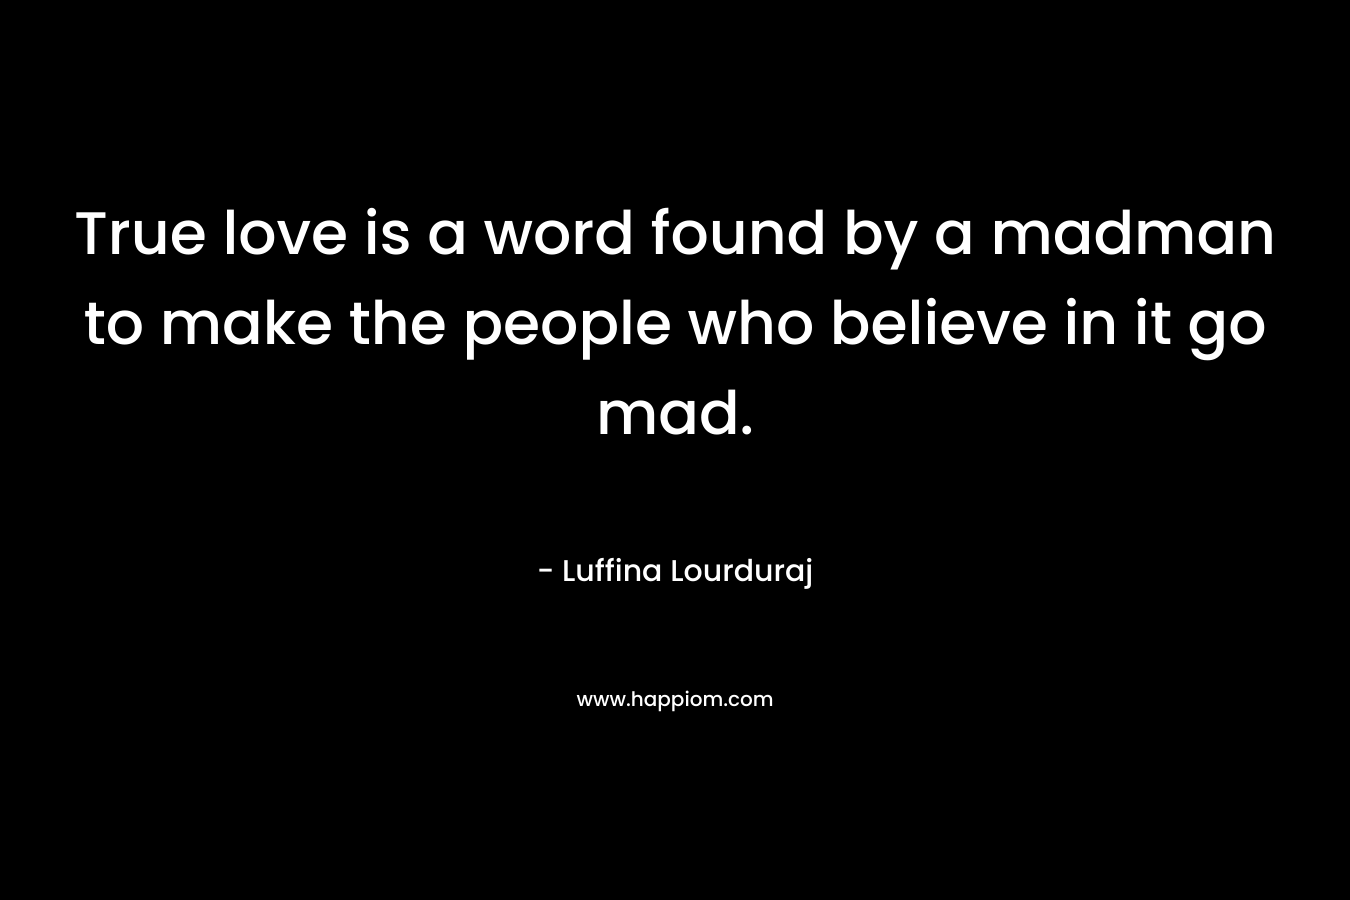 True love is a word found by a madman to make the people who believe in it go mad. – Luffina Lourduraj